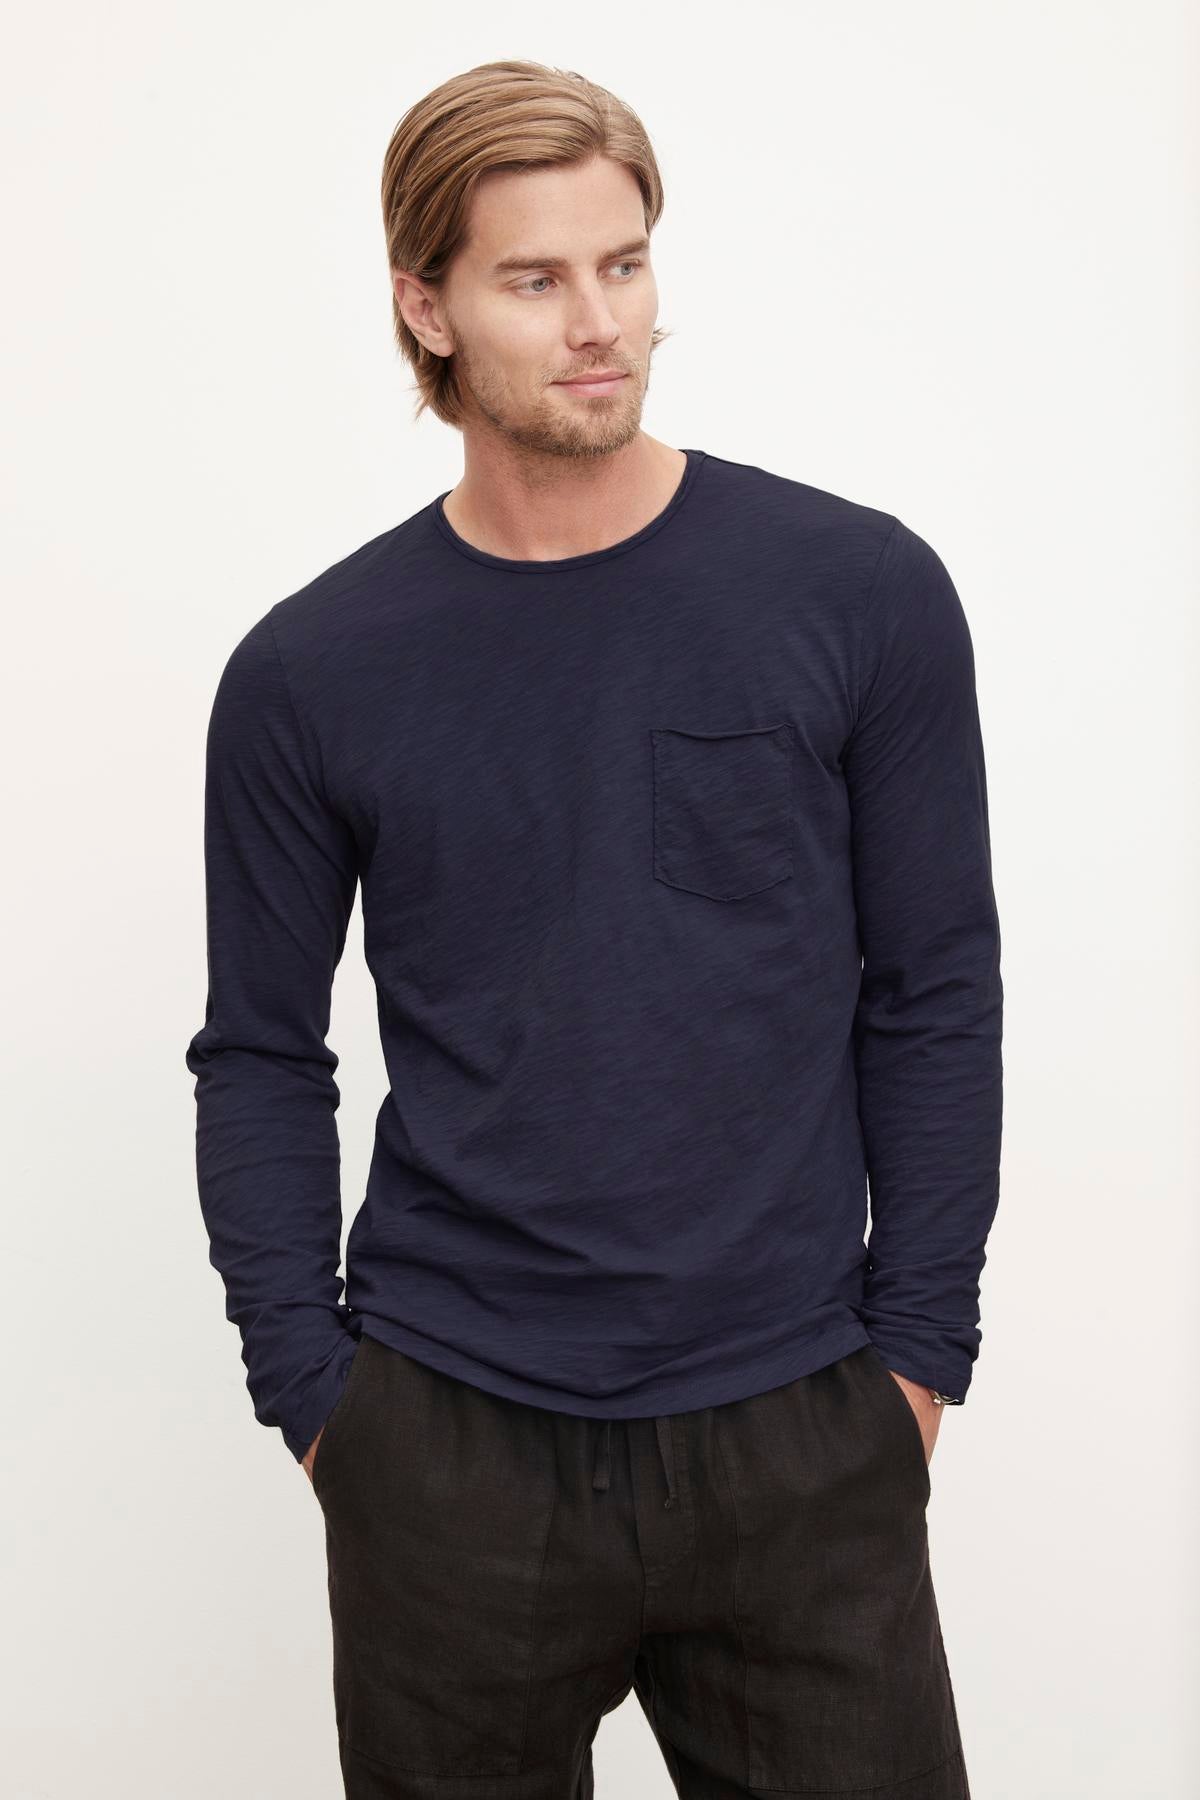 A man with neatly styled hair wearing a long-sleeve navy blue SIMEON RAW EDGE COTTON SLUB TEE with a pocket by Velvet by Graham & Spencer, posing with one hand in his pocket.-36418292187329